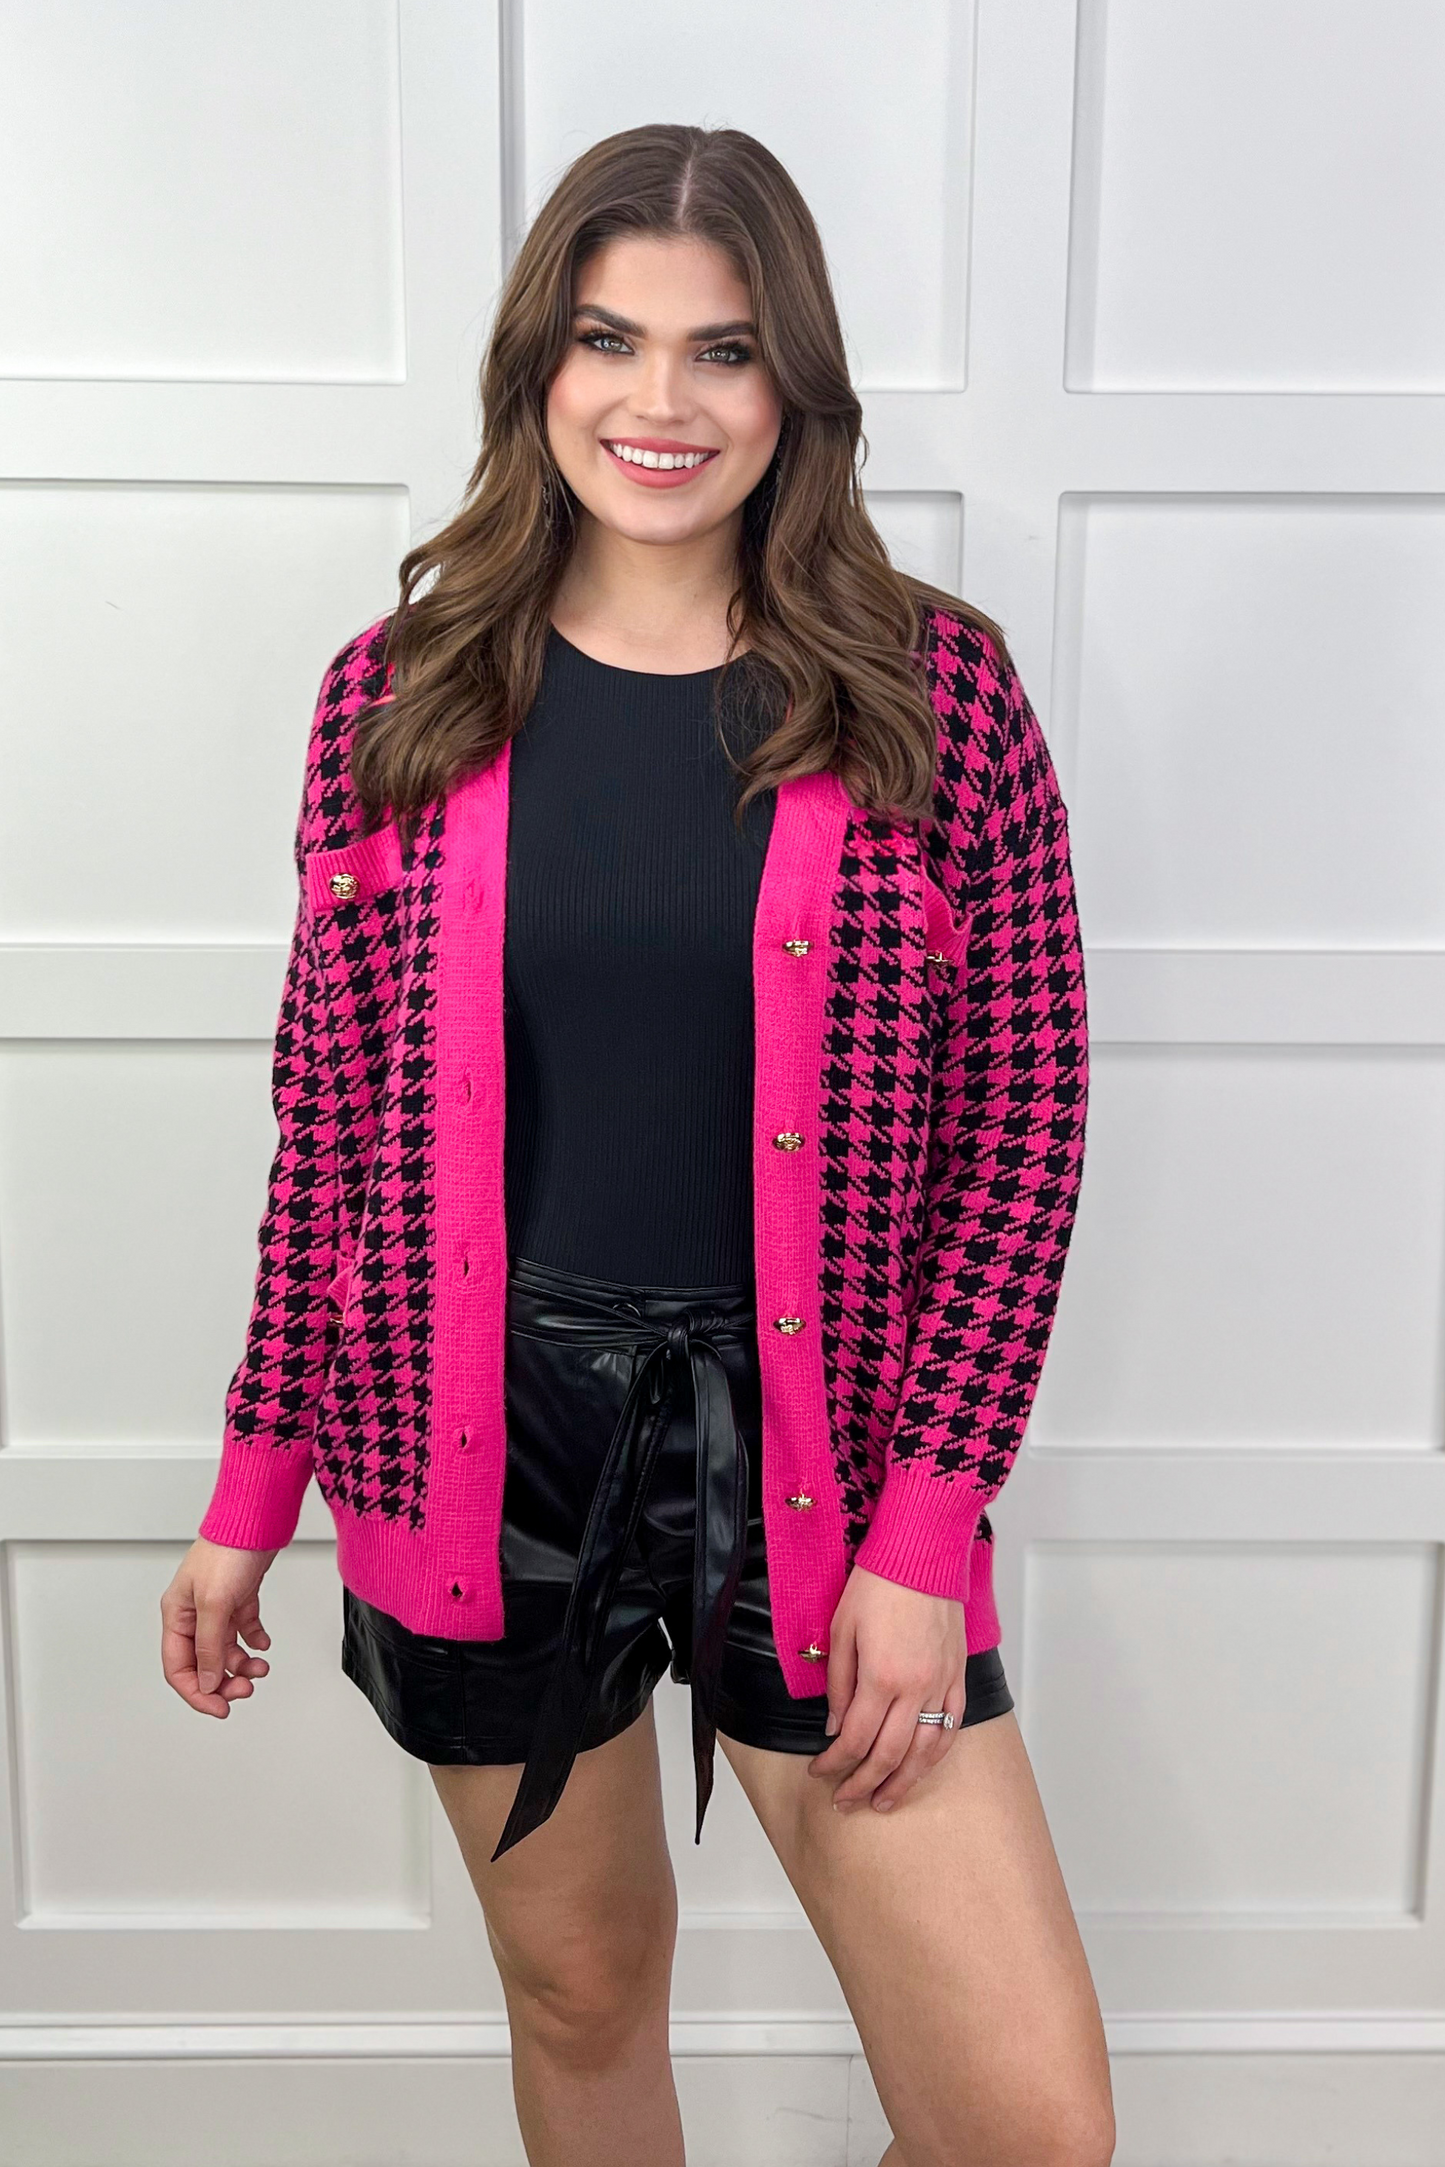 City of Love Houndstooth Jacket